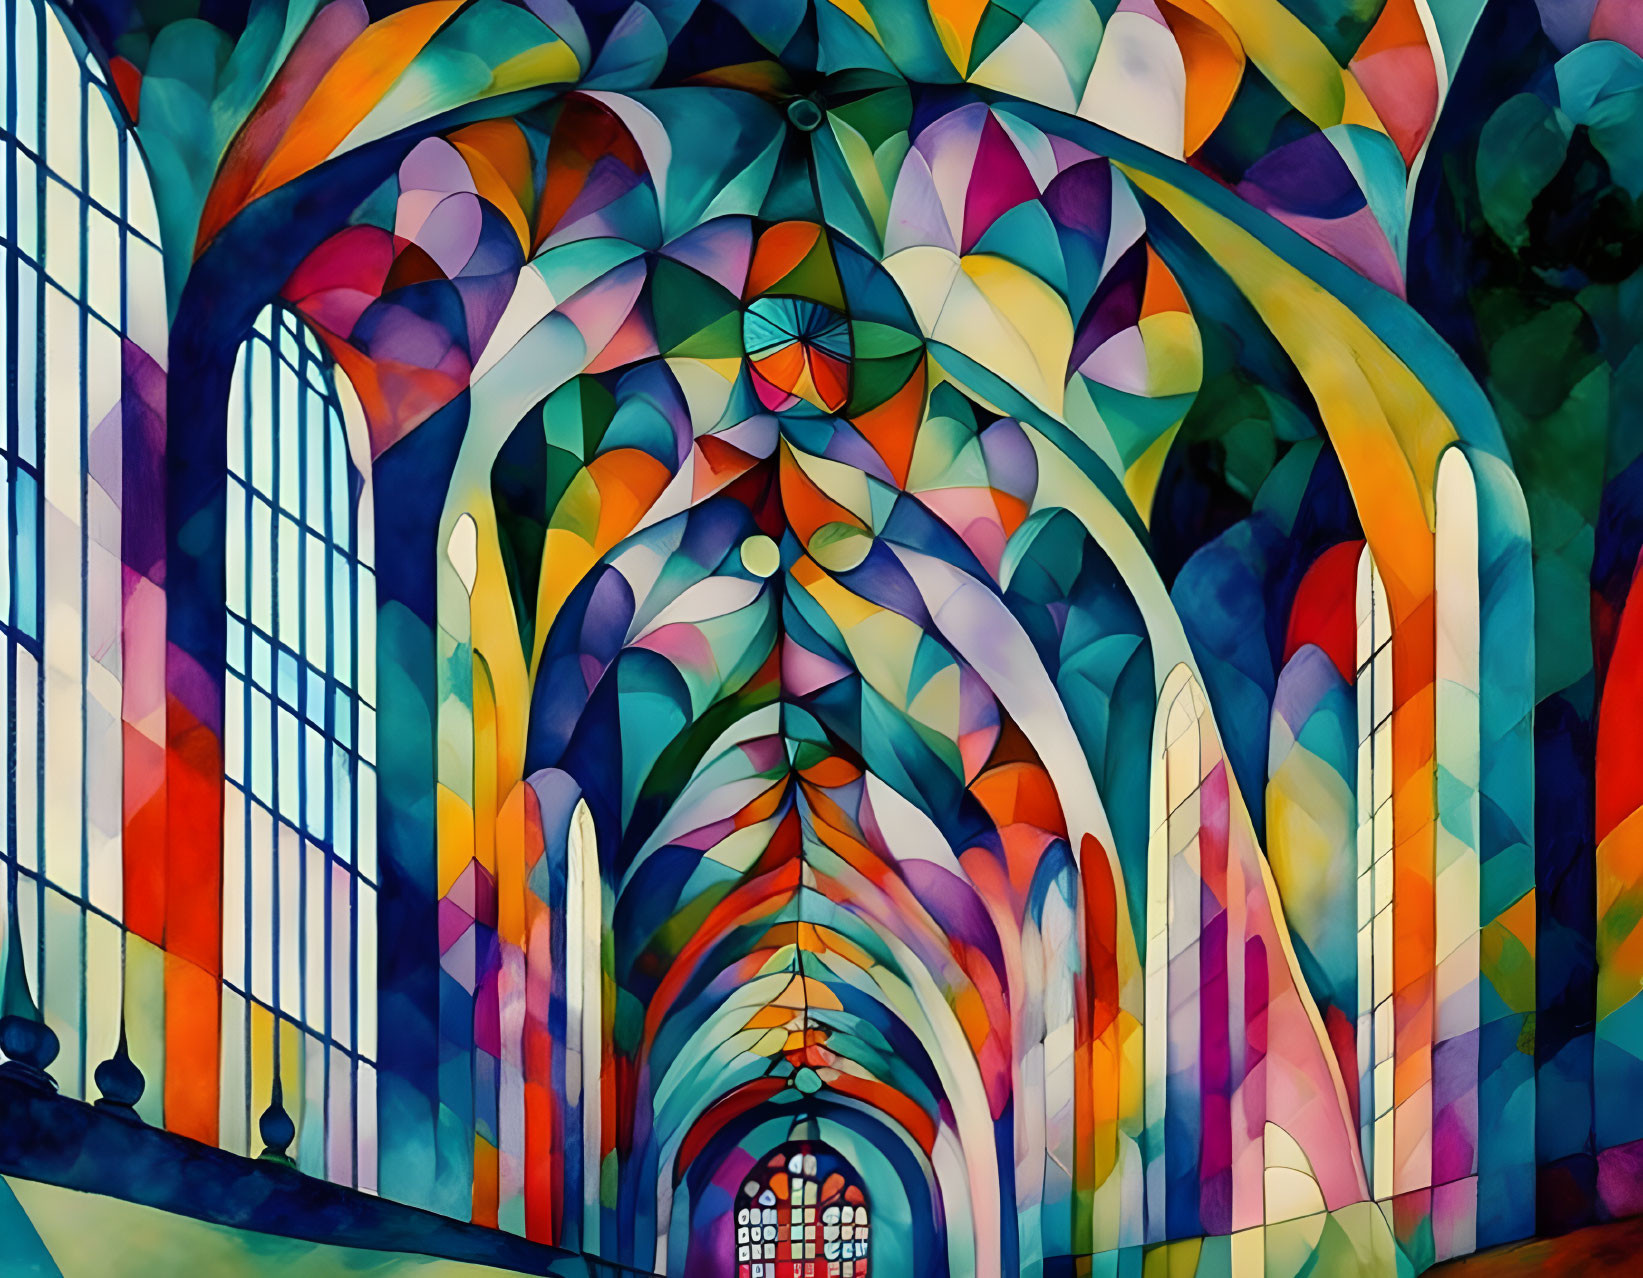 Multicolored Stained Glass Windows in Vaulted Ceiling